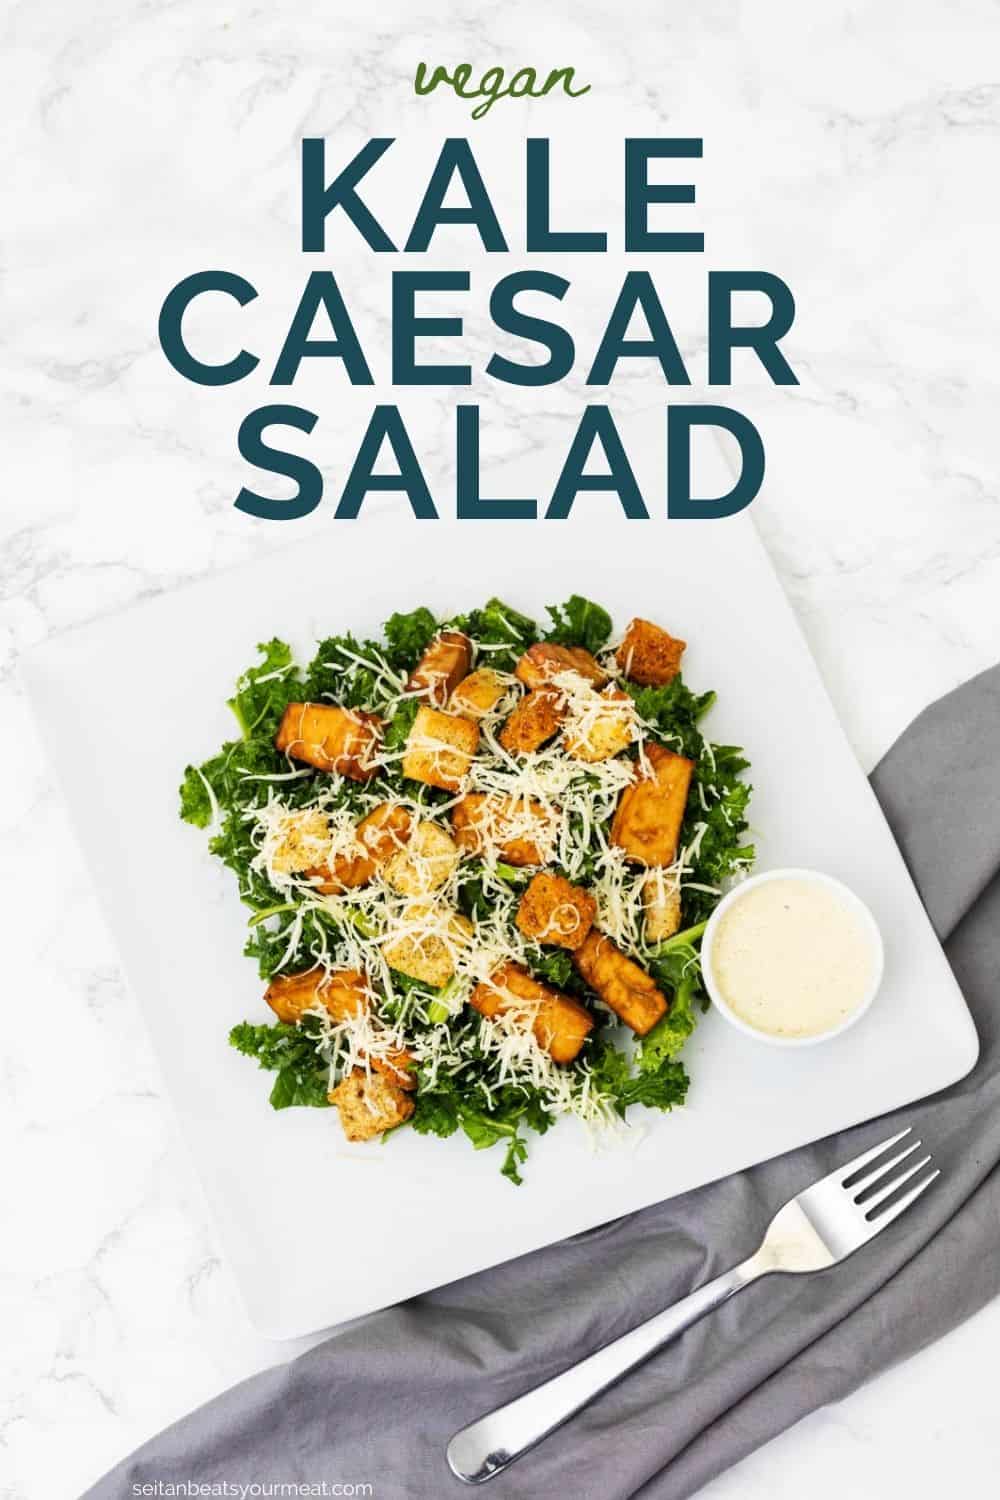 Plate of kale caesar salad with gray cloth napkin and fork with text "Vegan Kale Caesar Salad"